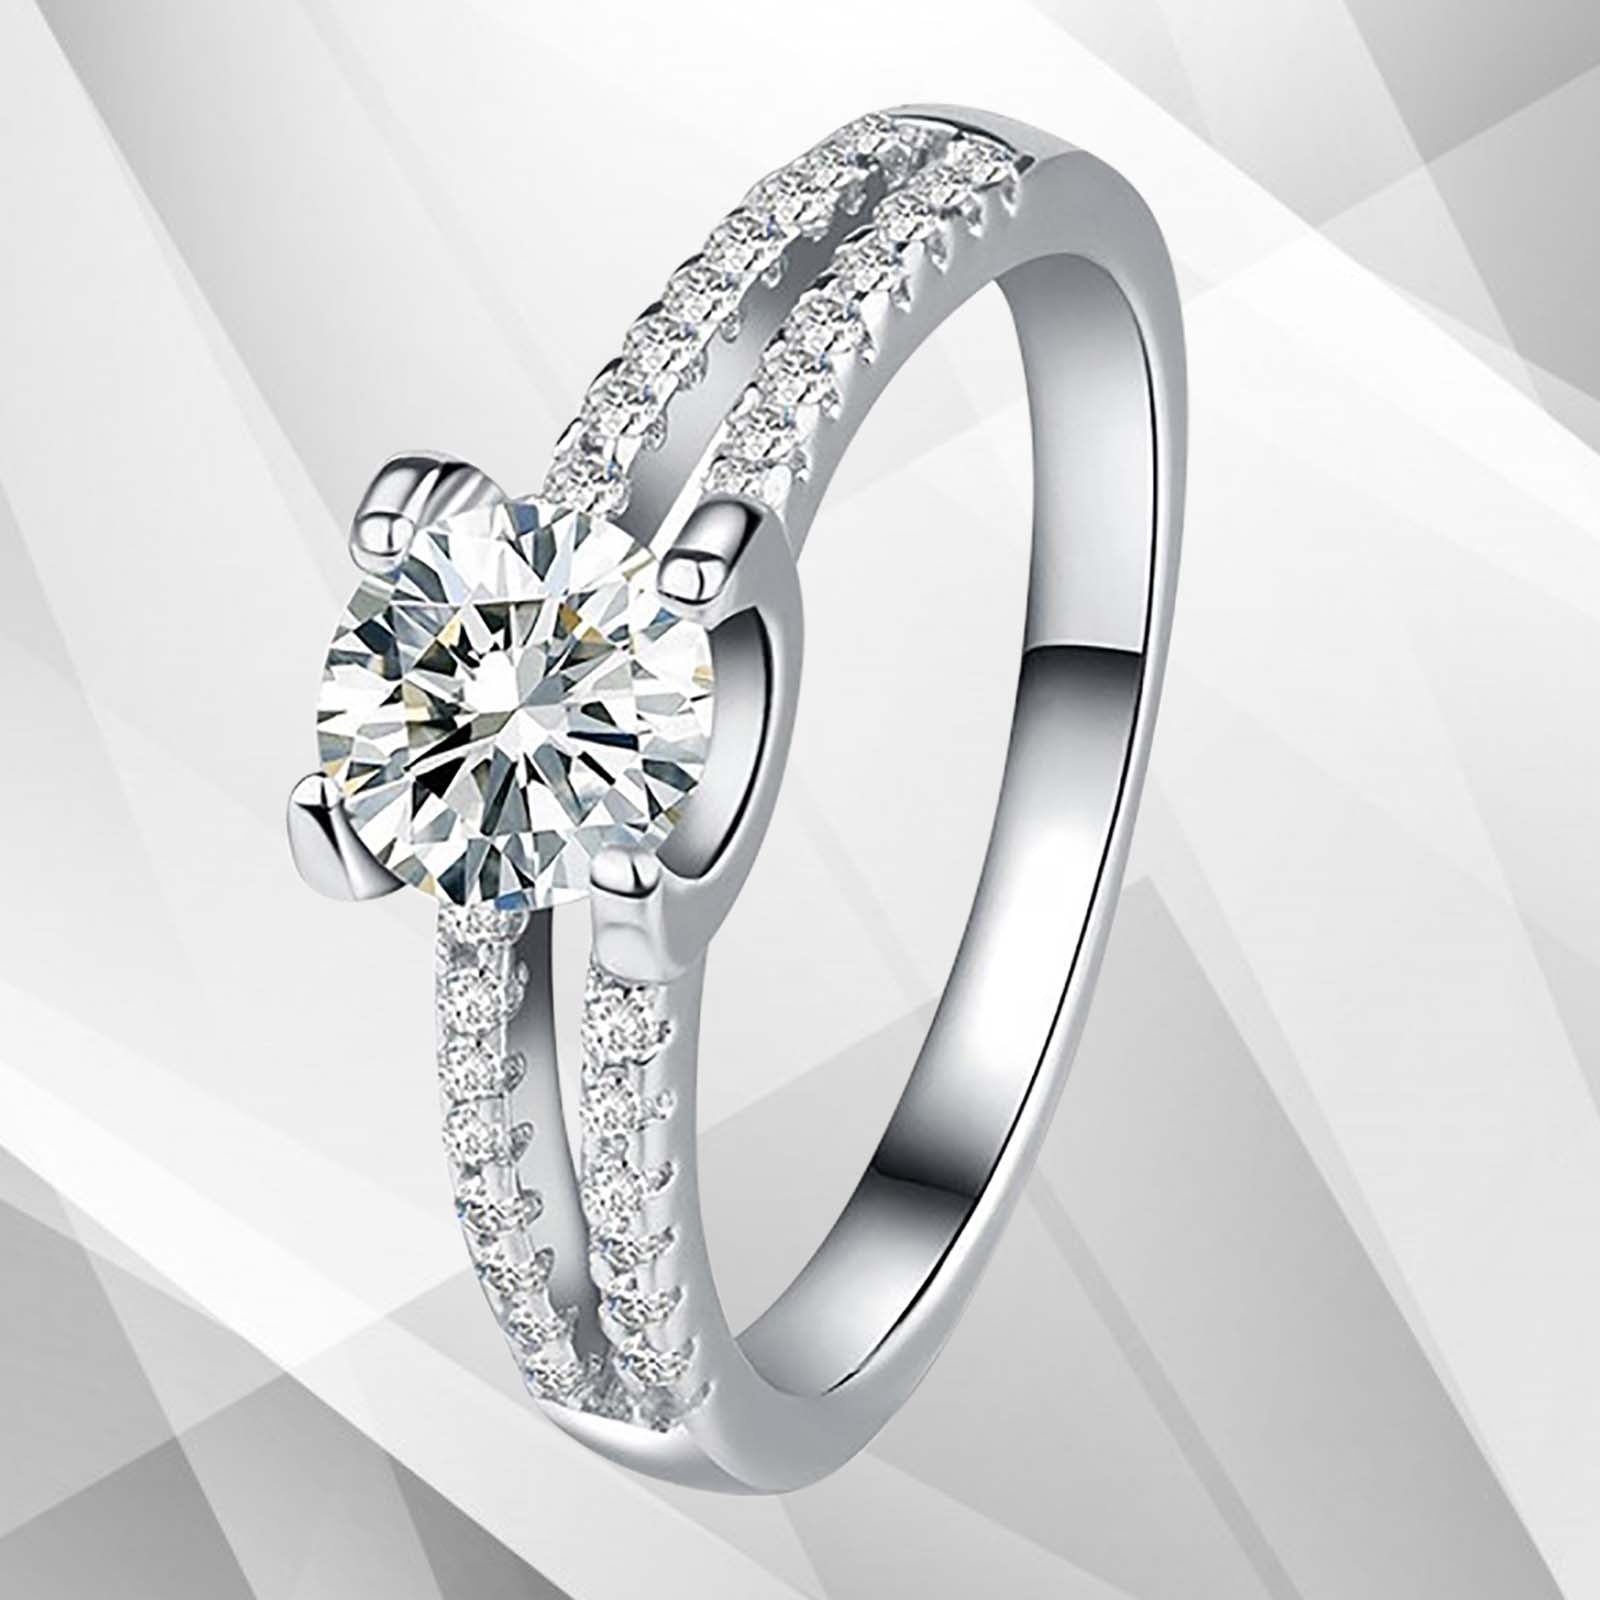 Exclusive Prong Settings Women Engagement Ring - 2.00Ct Cambodian CZ Diamond, 18Ct White Gold Over Brass - NDC14 Bijou Her